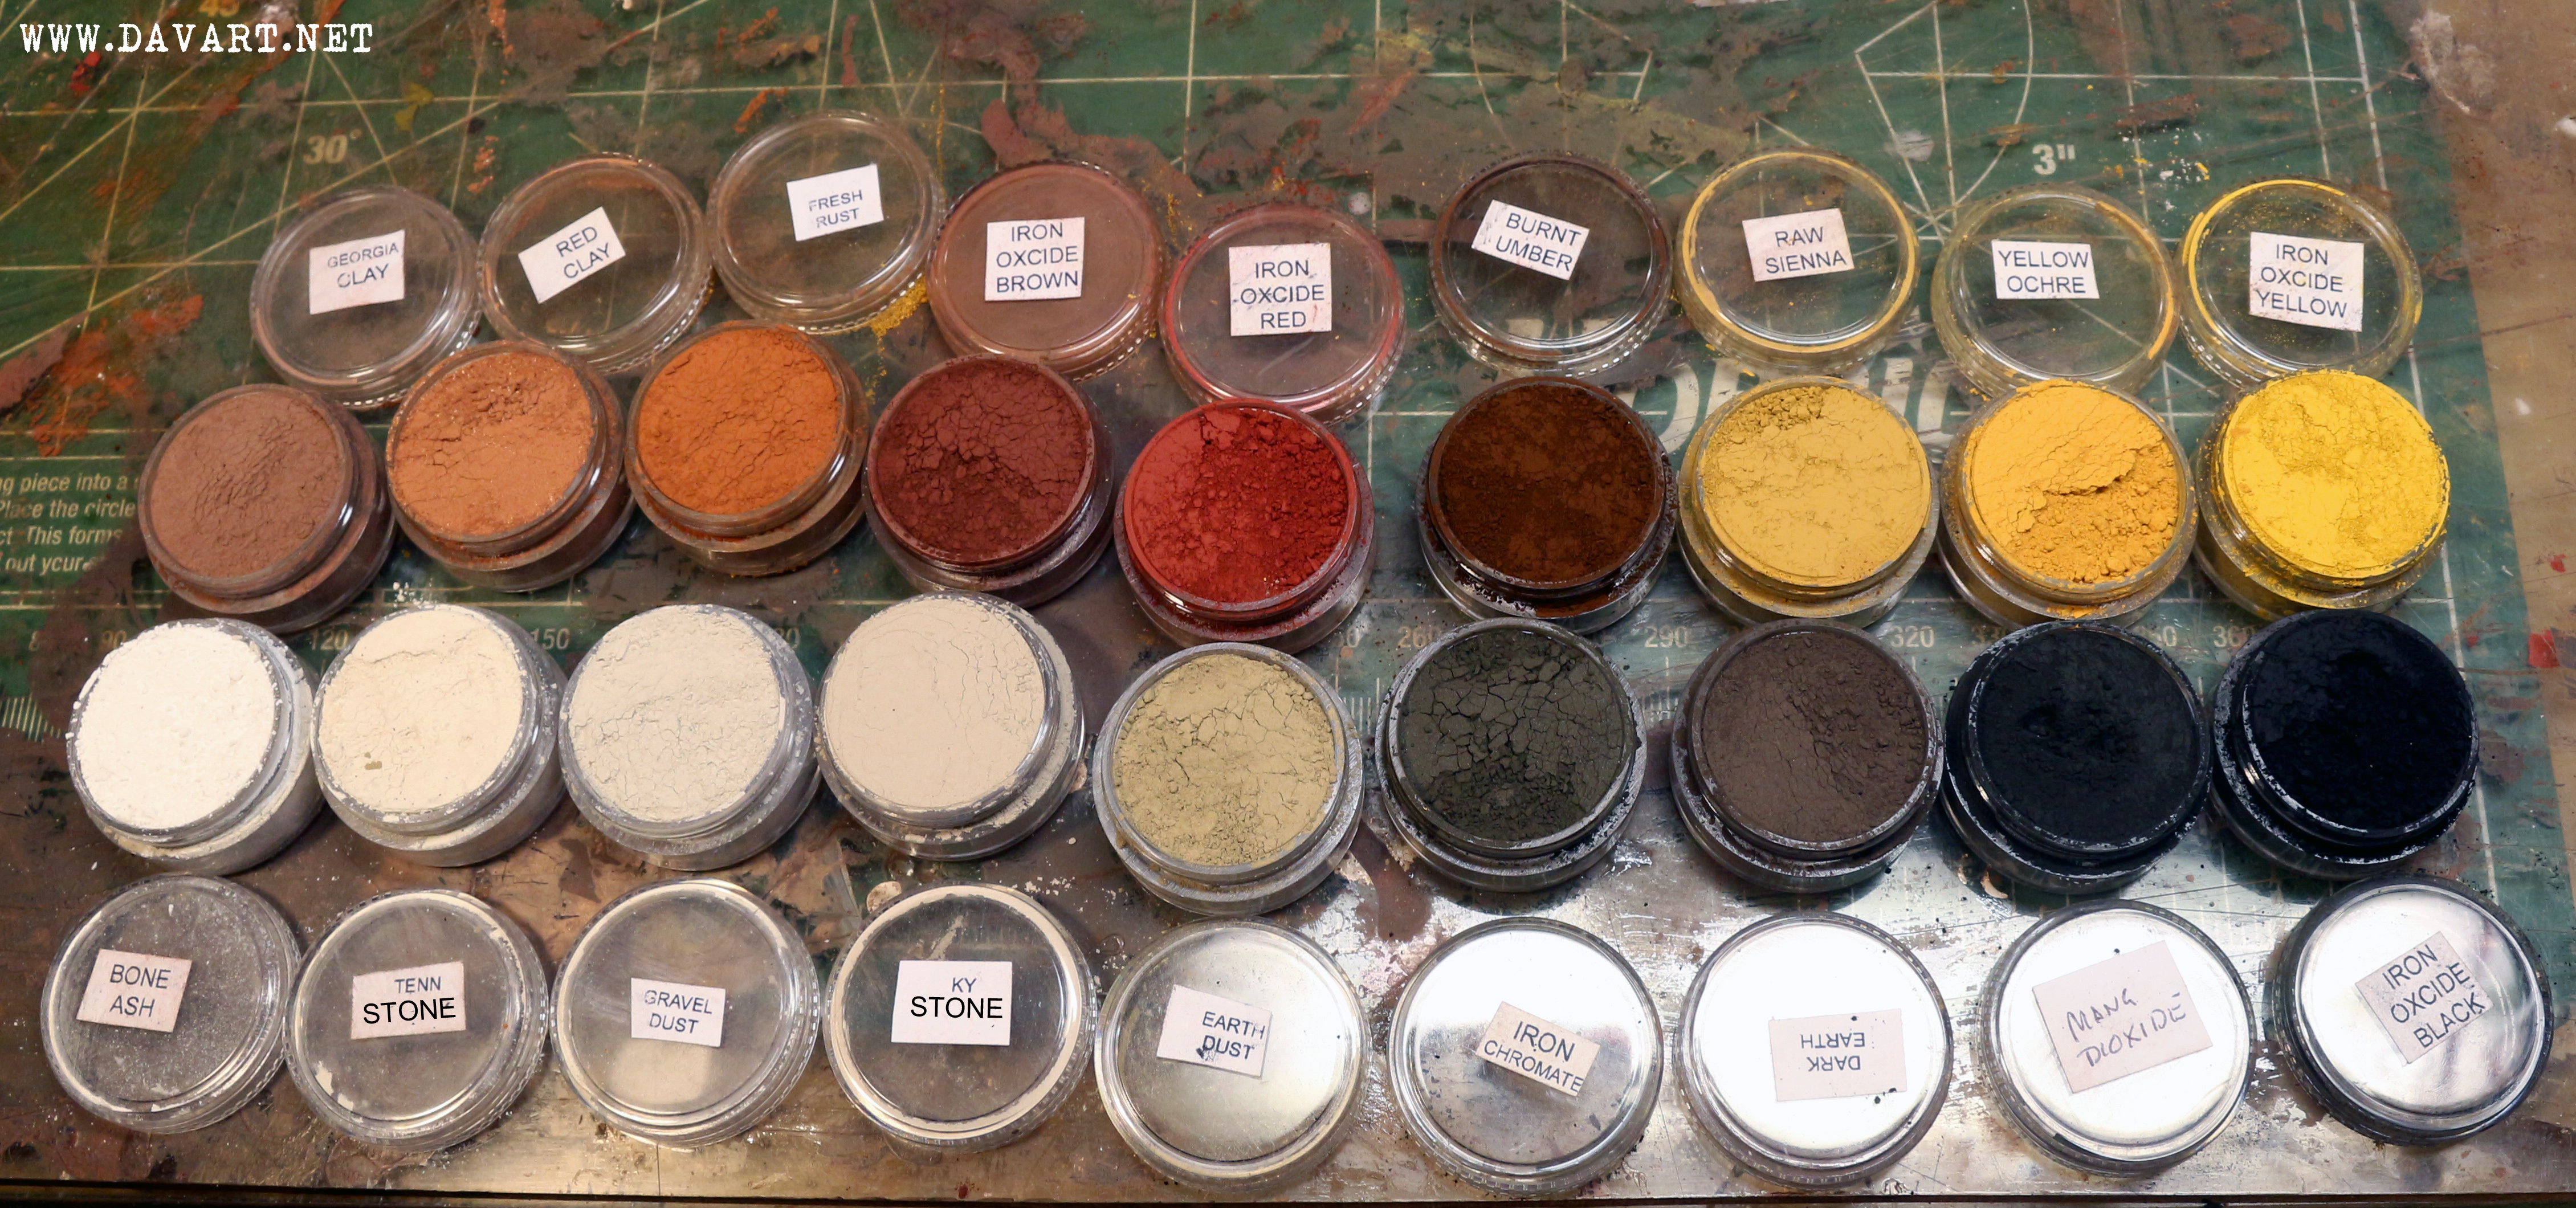 WP08 DAVE'S WEATHERING POWDERS ALL NATURAL PIGMENT RAW SIENNA DUST STAINS DIRT 